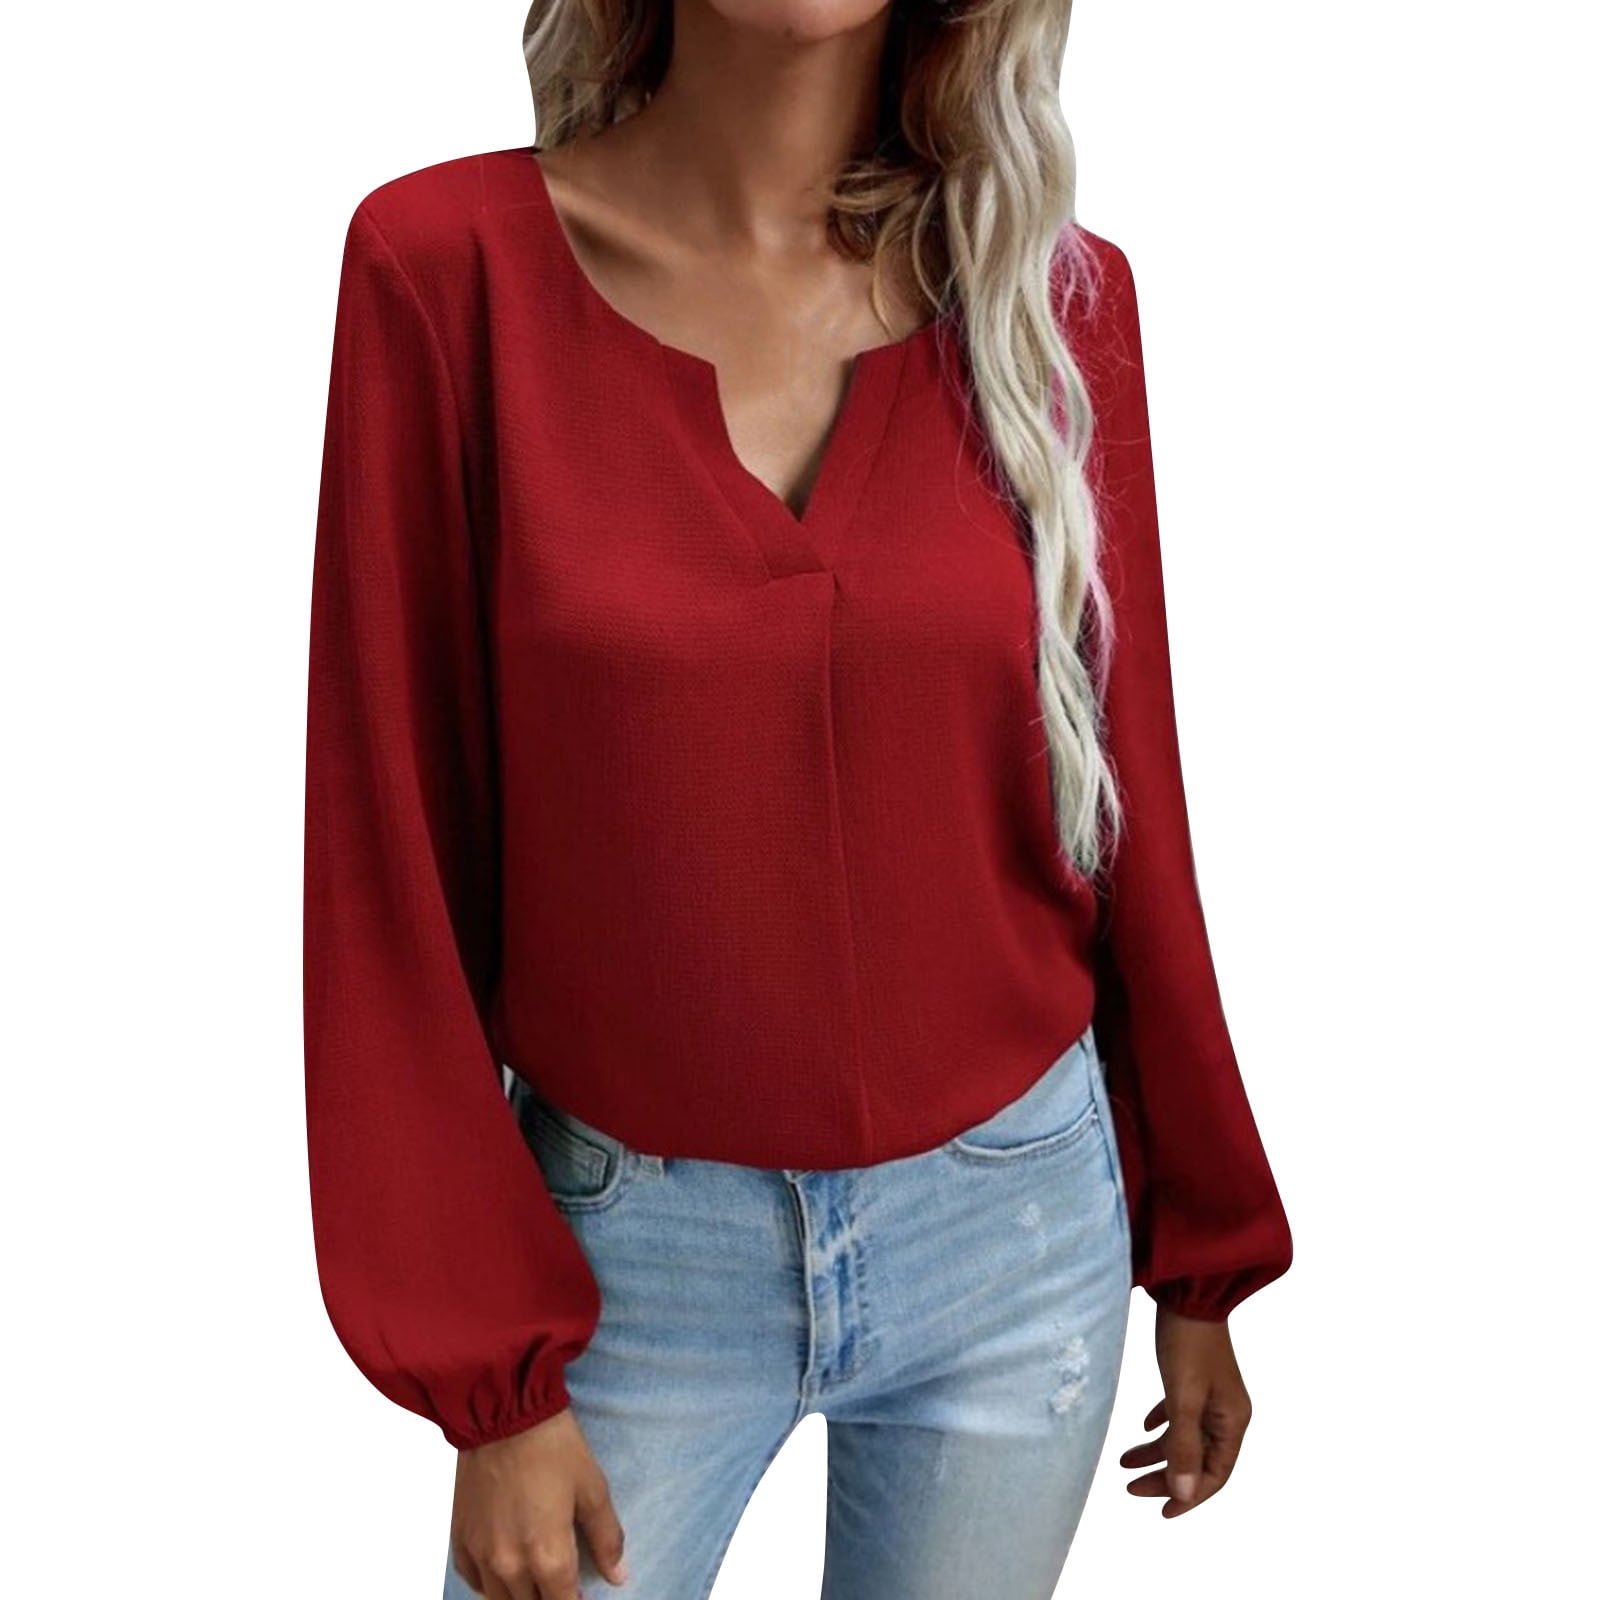 adviicd Womens Long Sleeve Blouse Women's Long Puff Sleeve Tops Dressy  Casual V Neck Cute Blouse Shirt Tunic Tops Red,M 